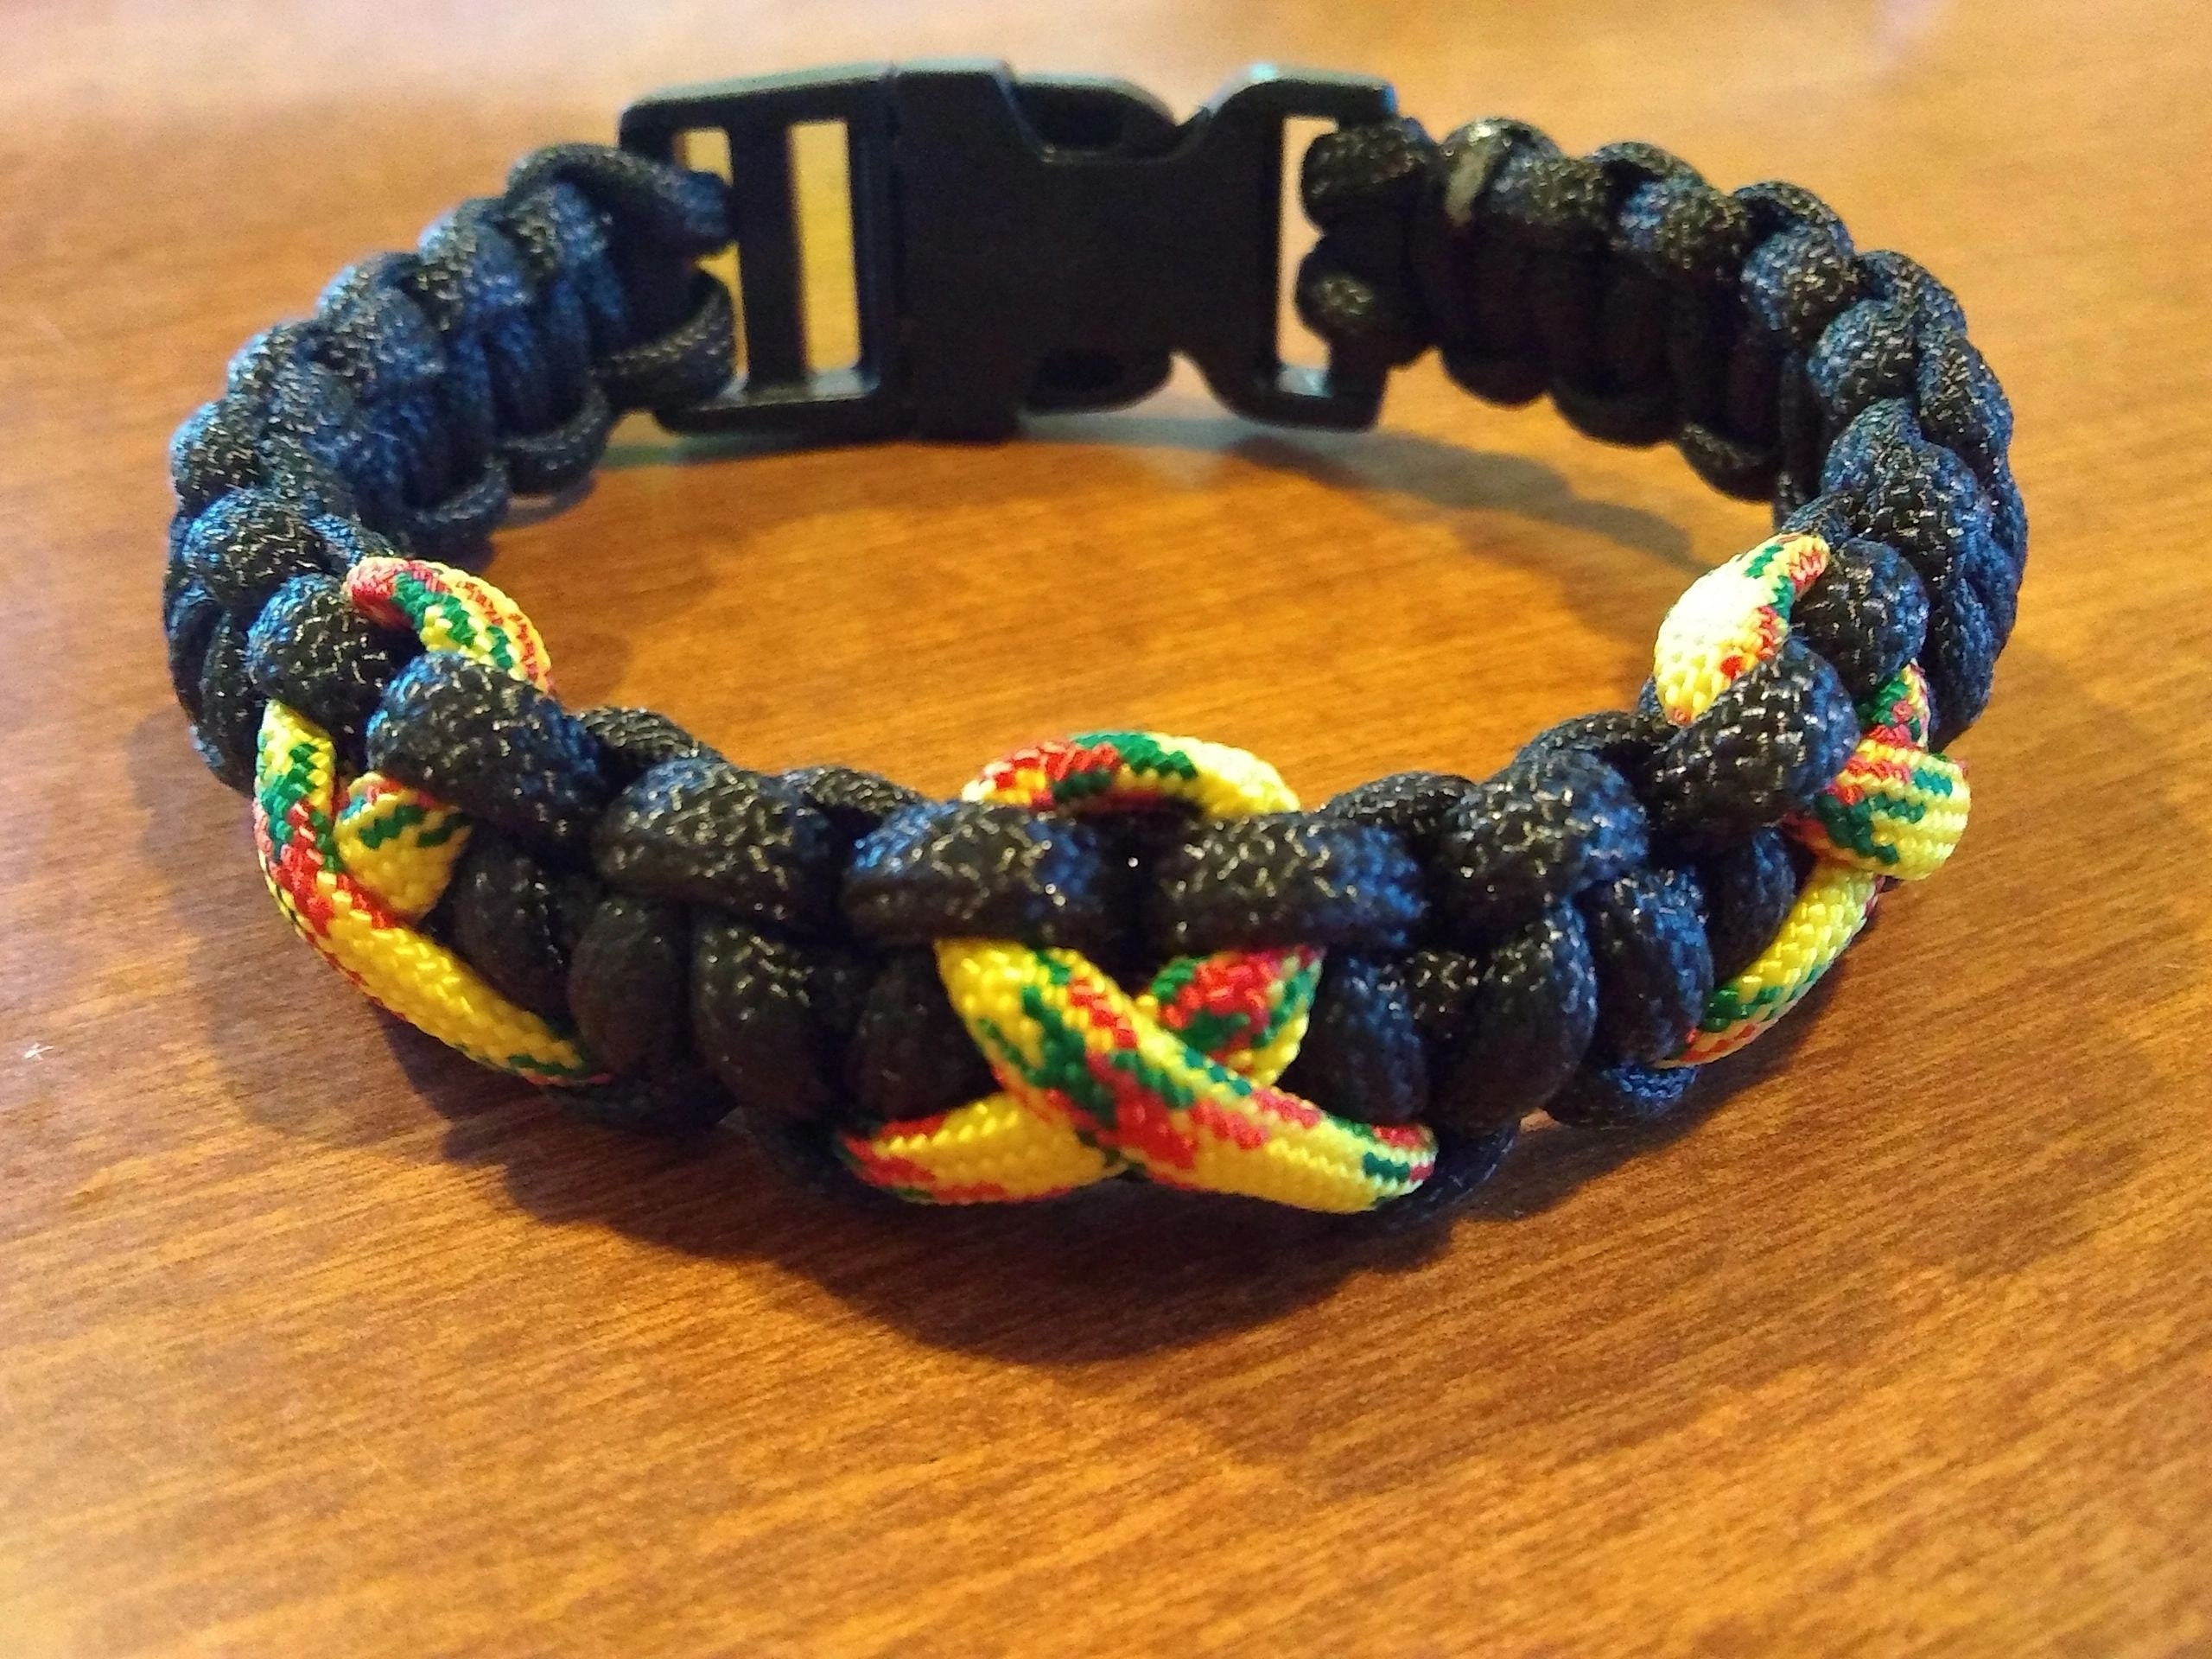 Vietnam Veteran Bracelet, Paracord, Hand Crafted, Military, Veterans Gift, Made in USA